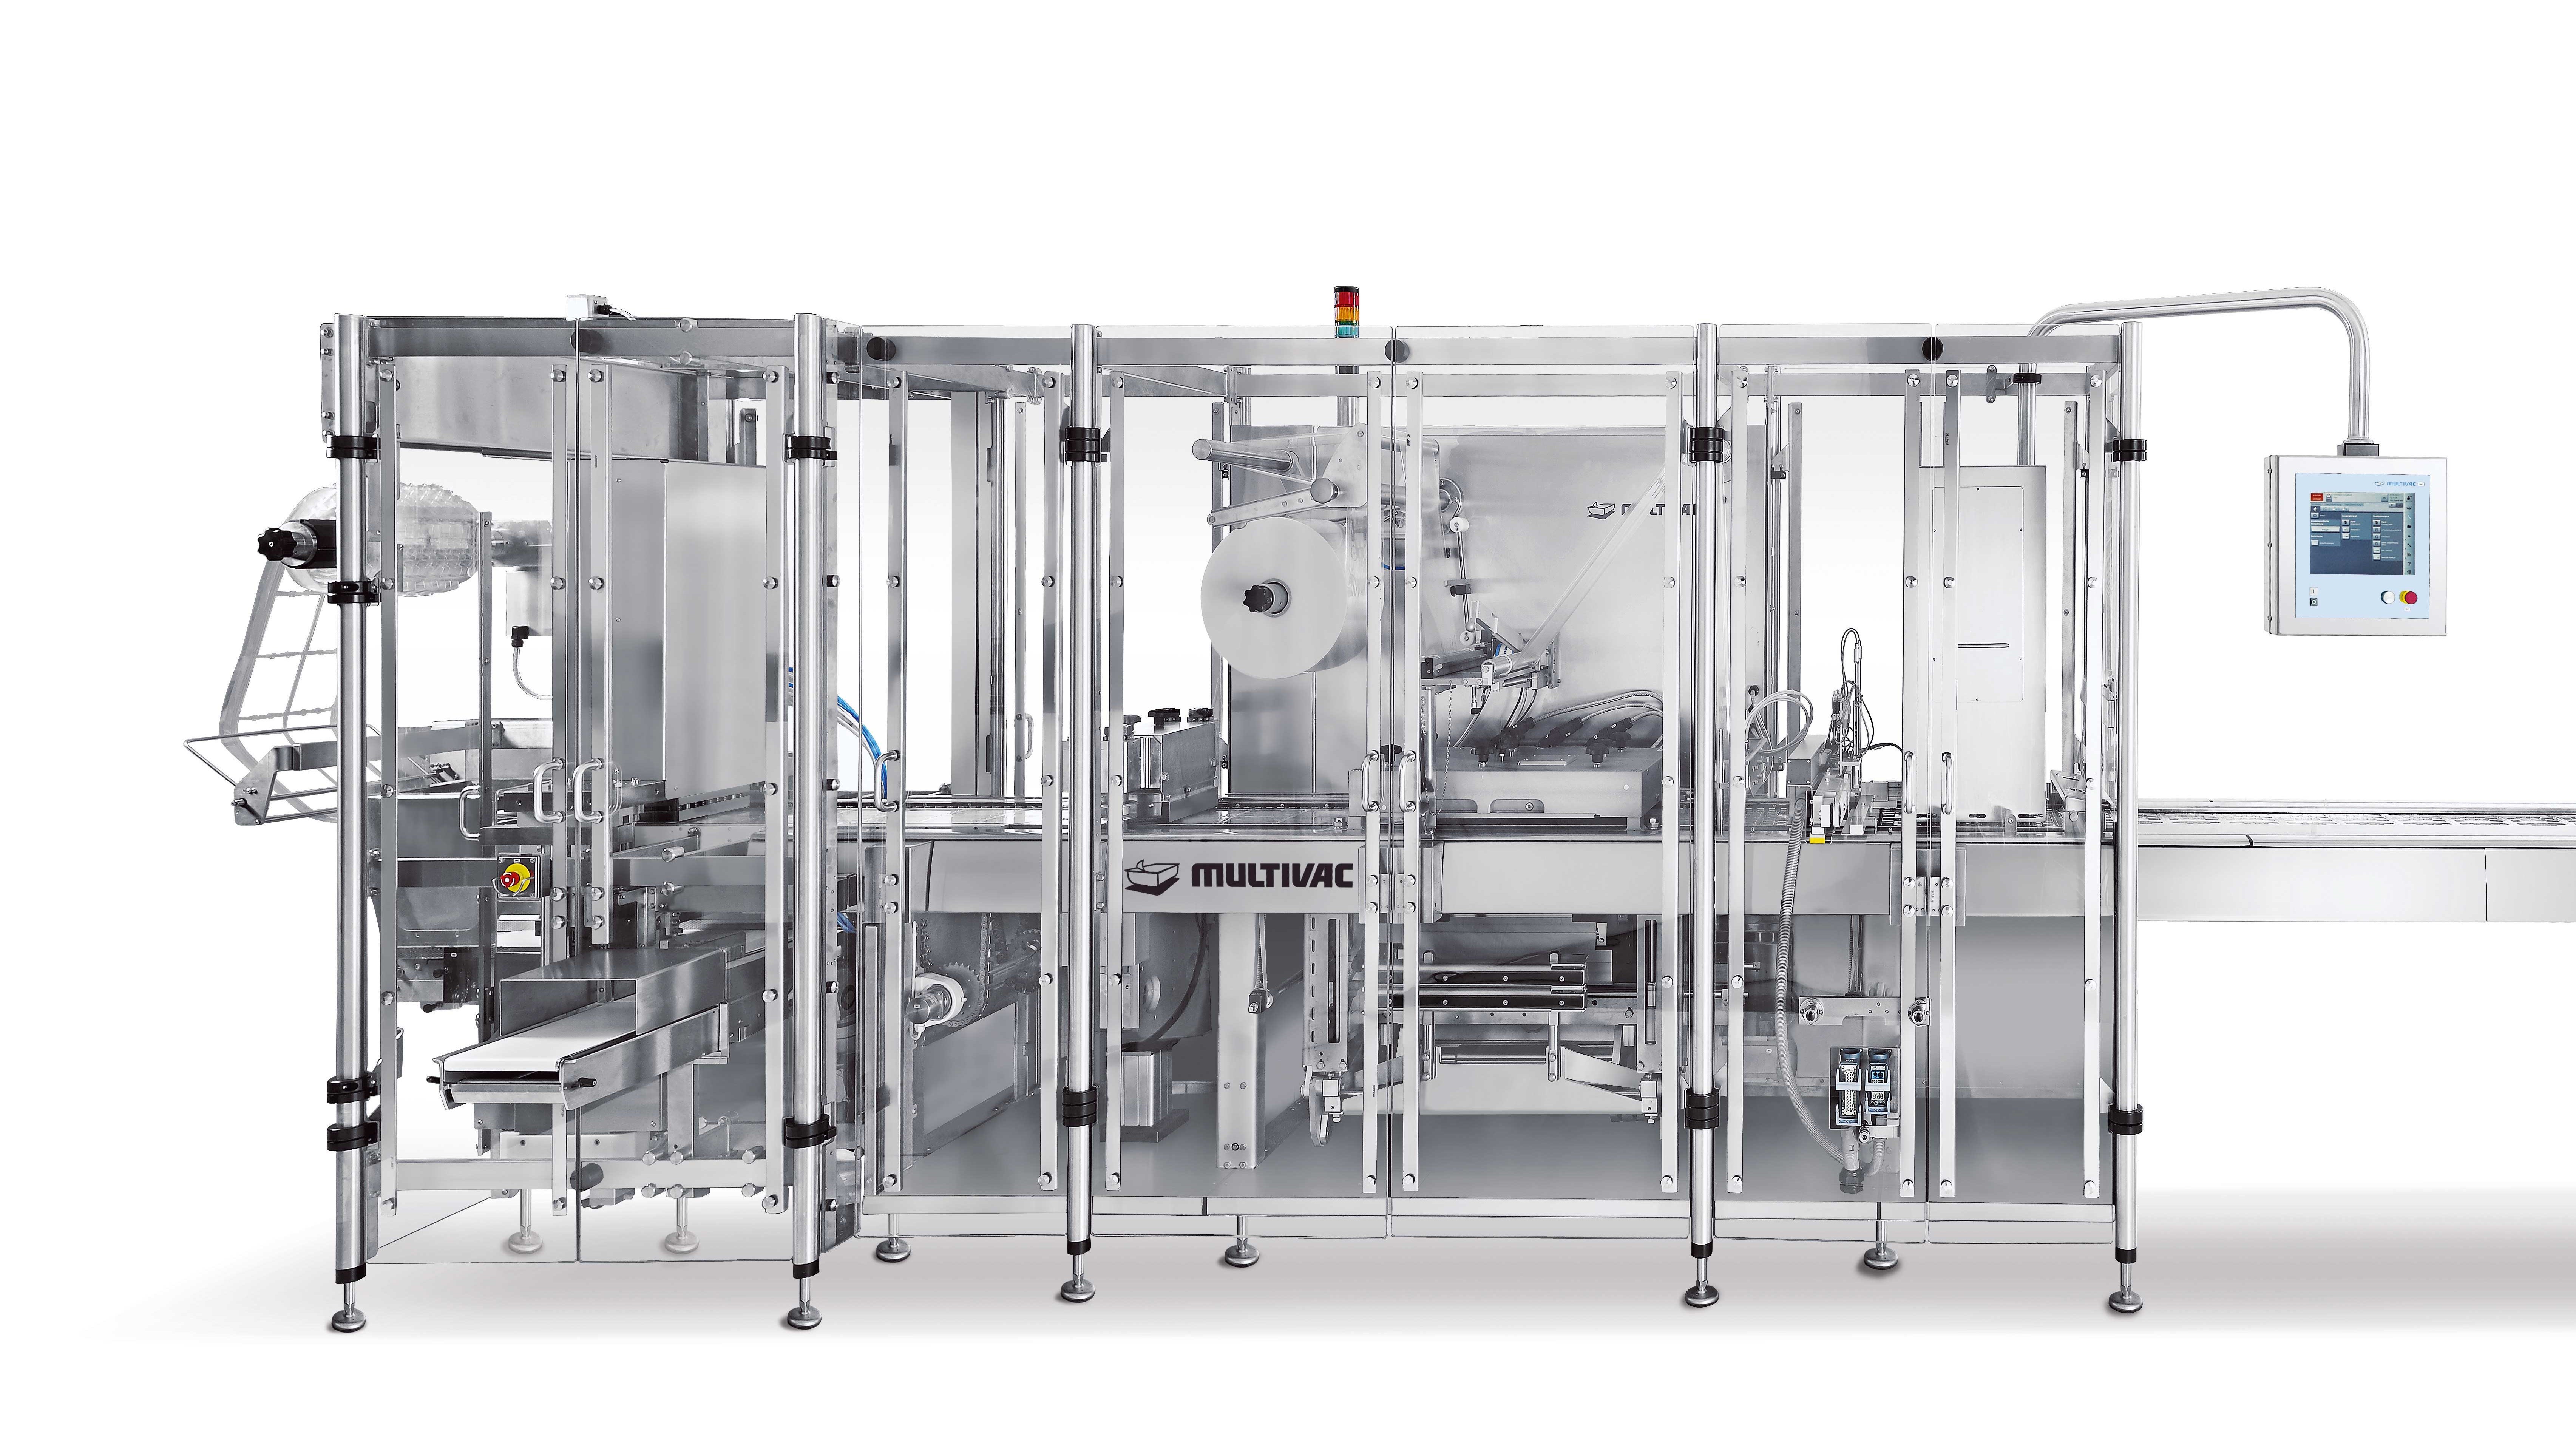 A packaging machine from MULTIVAC.